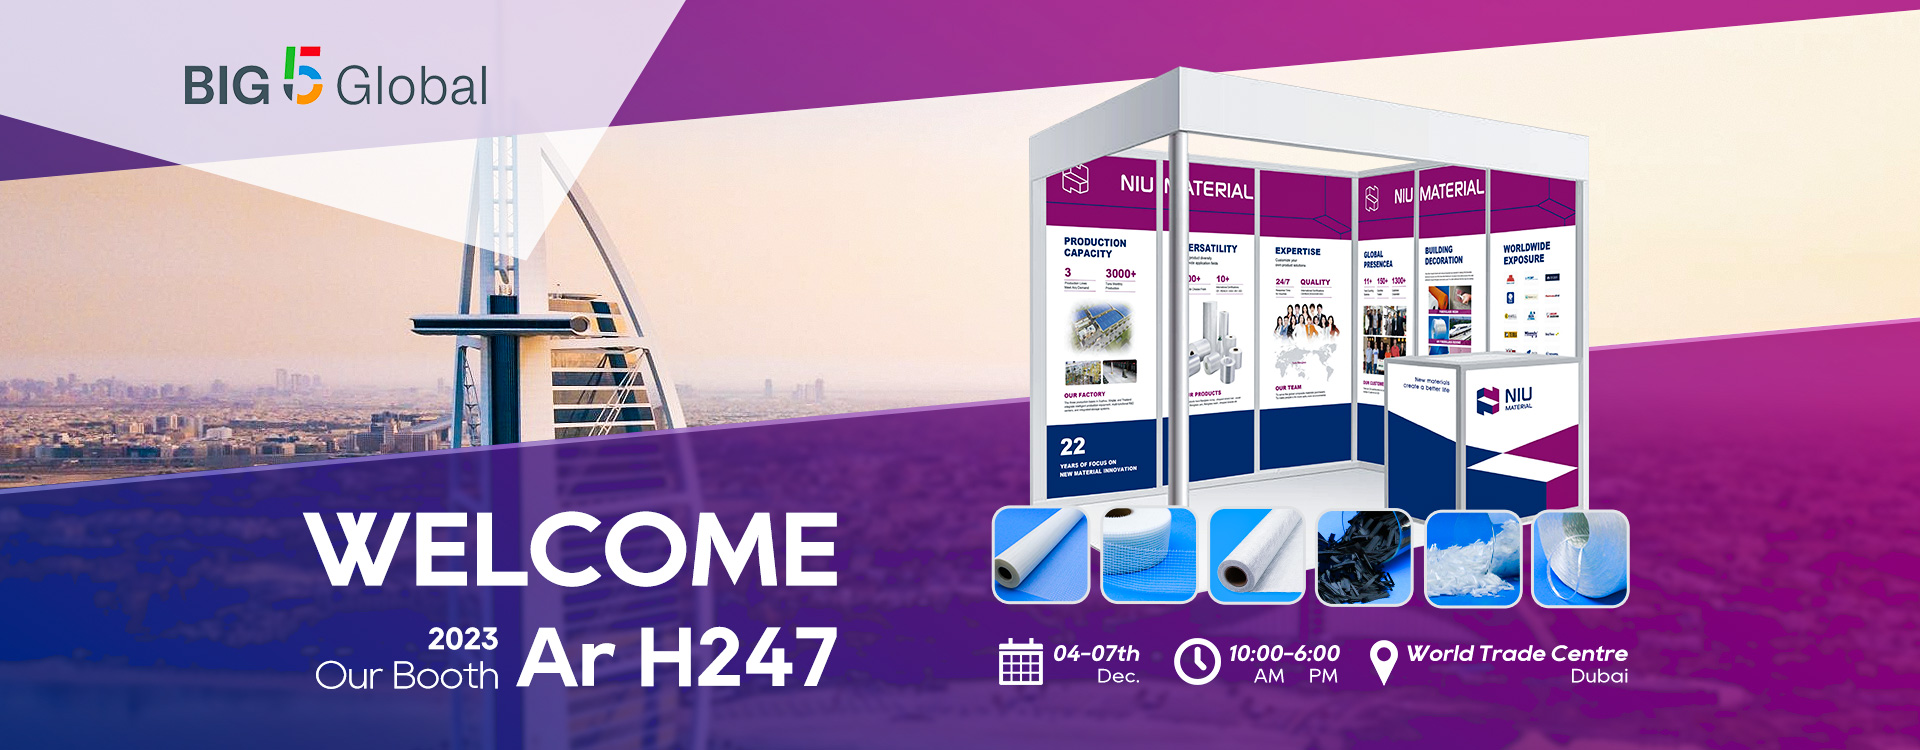 2023 BIG 5 Global: Discover the innovative product guide in the construction materials sector offered by at booth Ar H247!